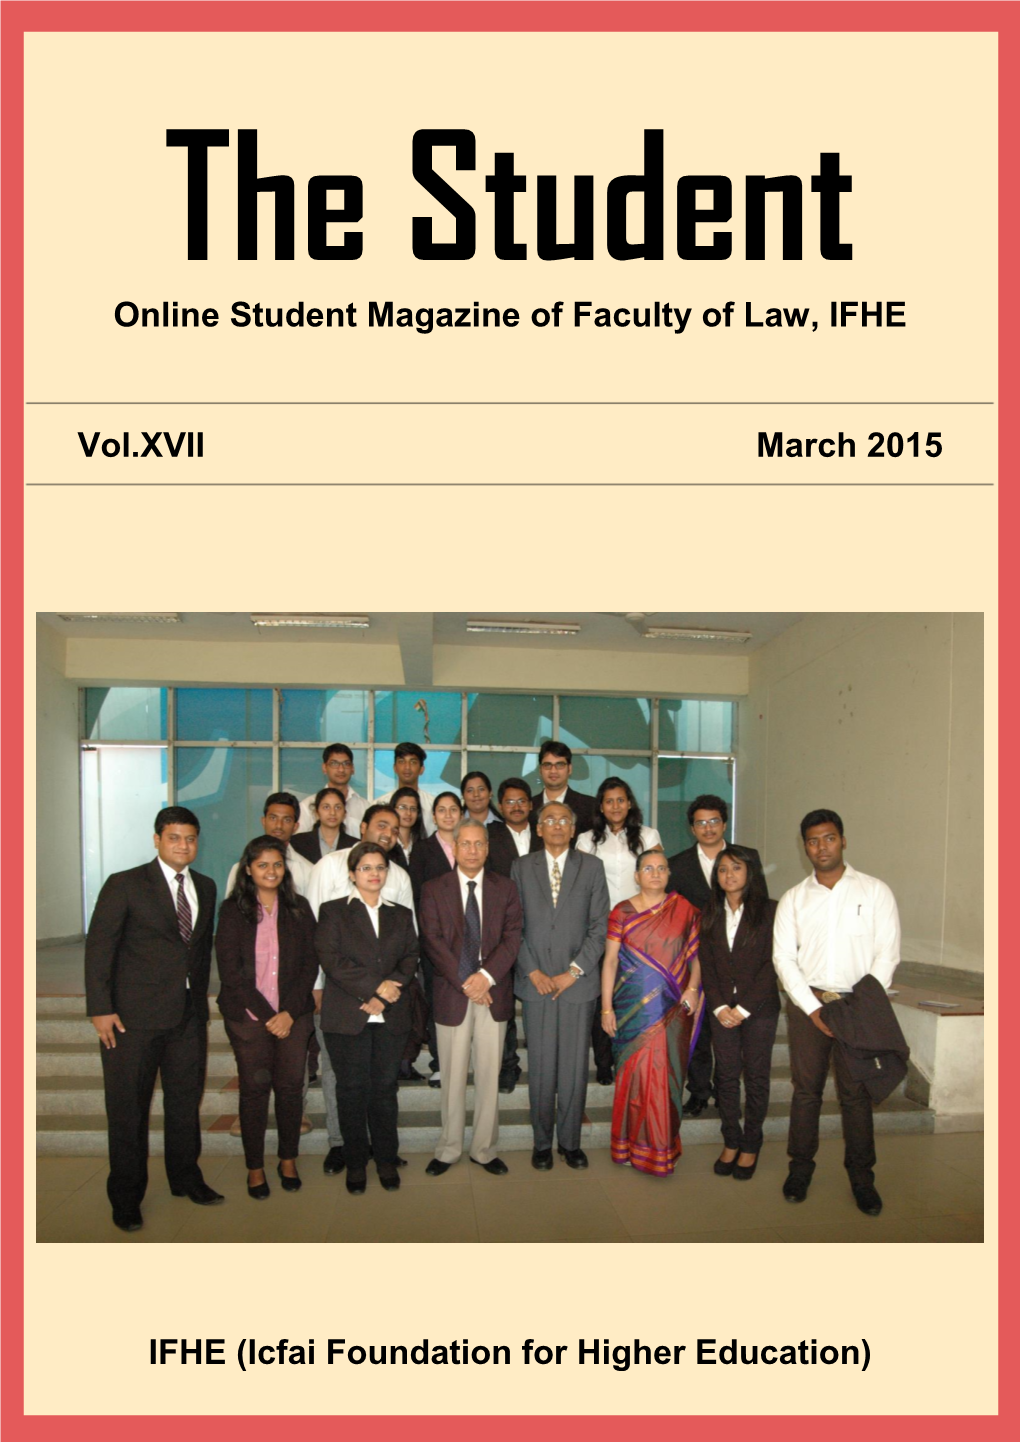 Online Student Magazine of Faculty of Law, IFHE